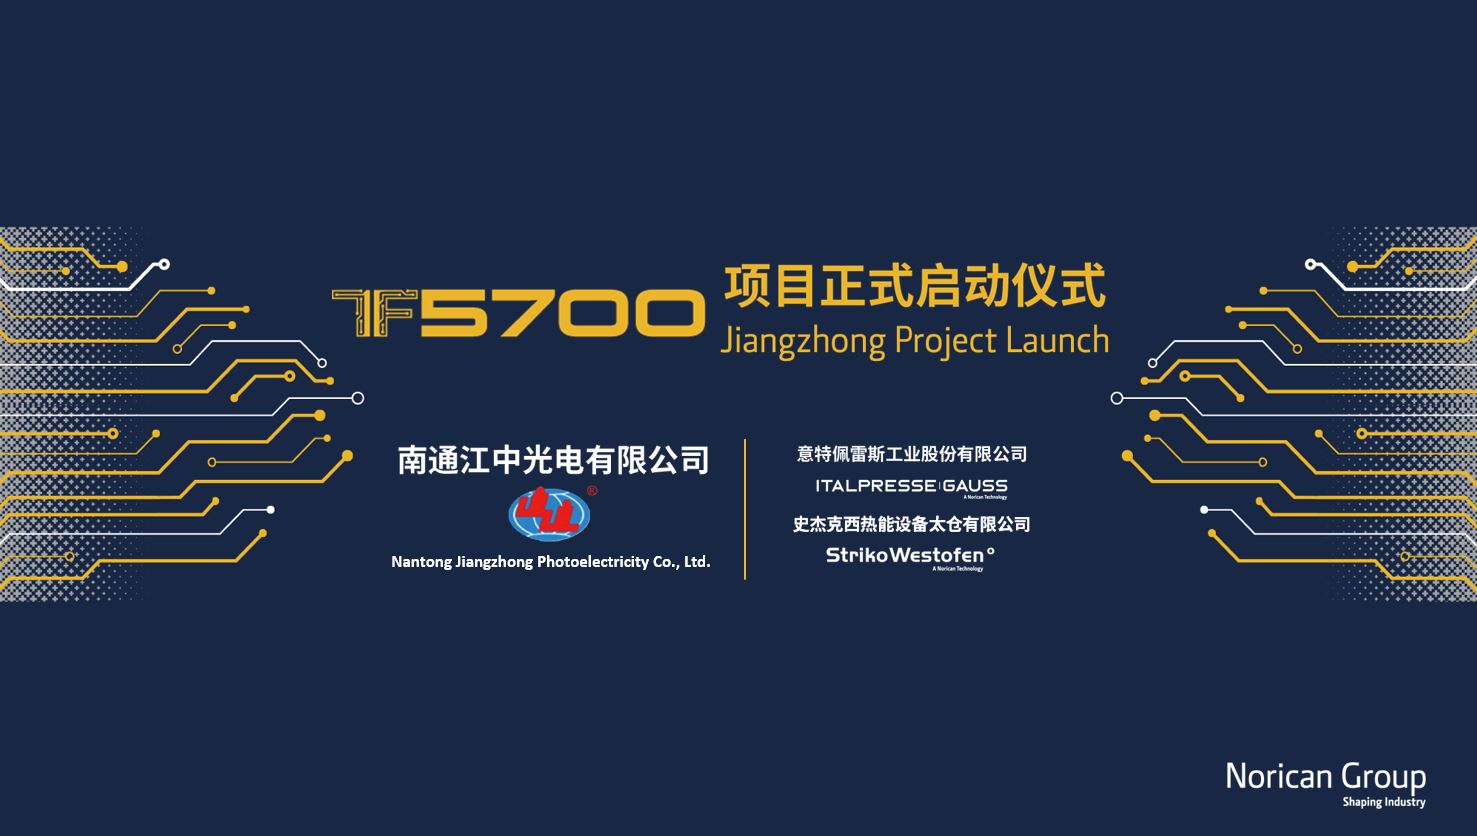 TF5700 Official launch